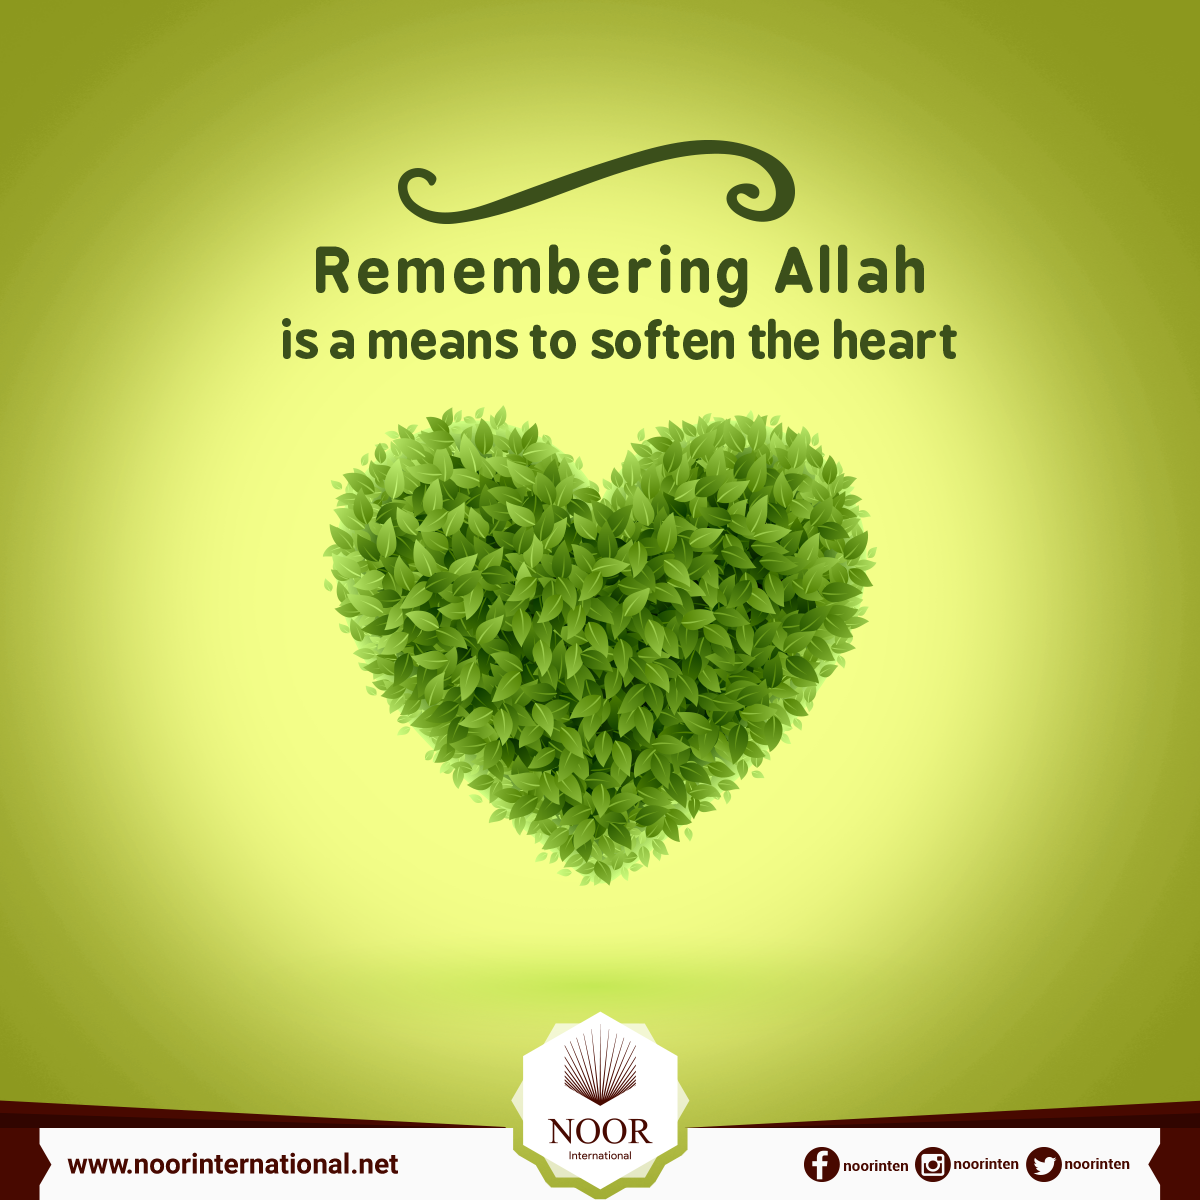 Remembering Allah is a means to soften the heart